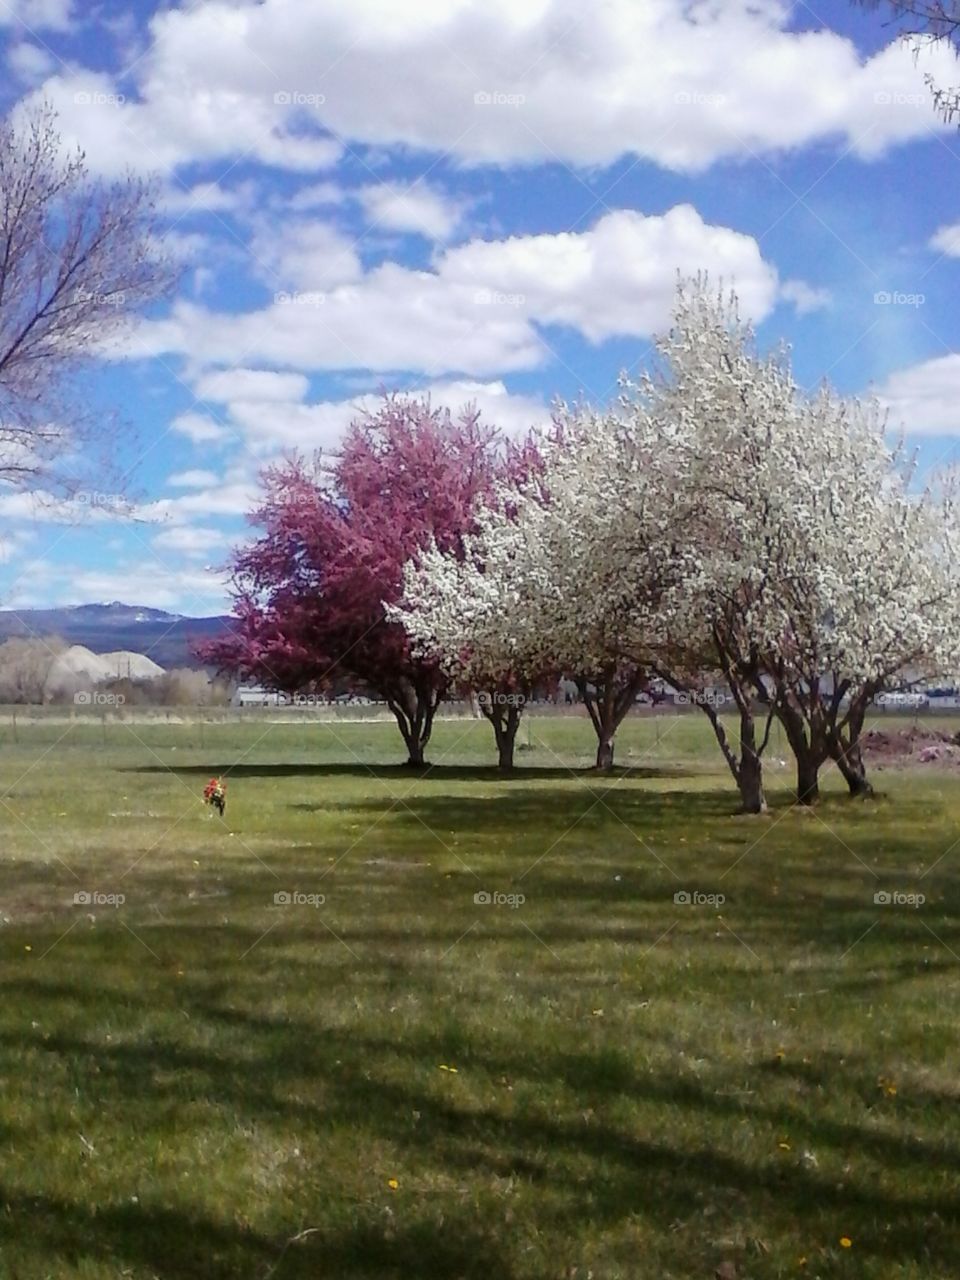 early spring trees begin to bloom at peaceful cemetery.